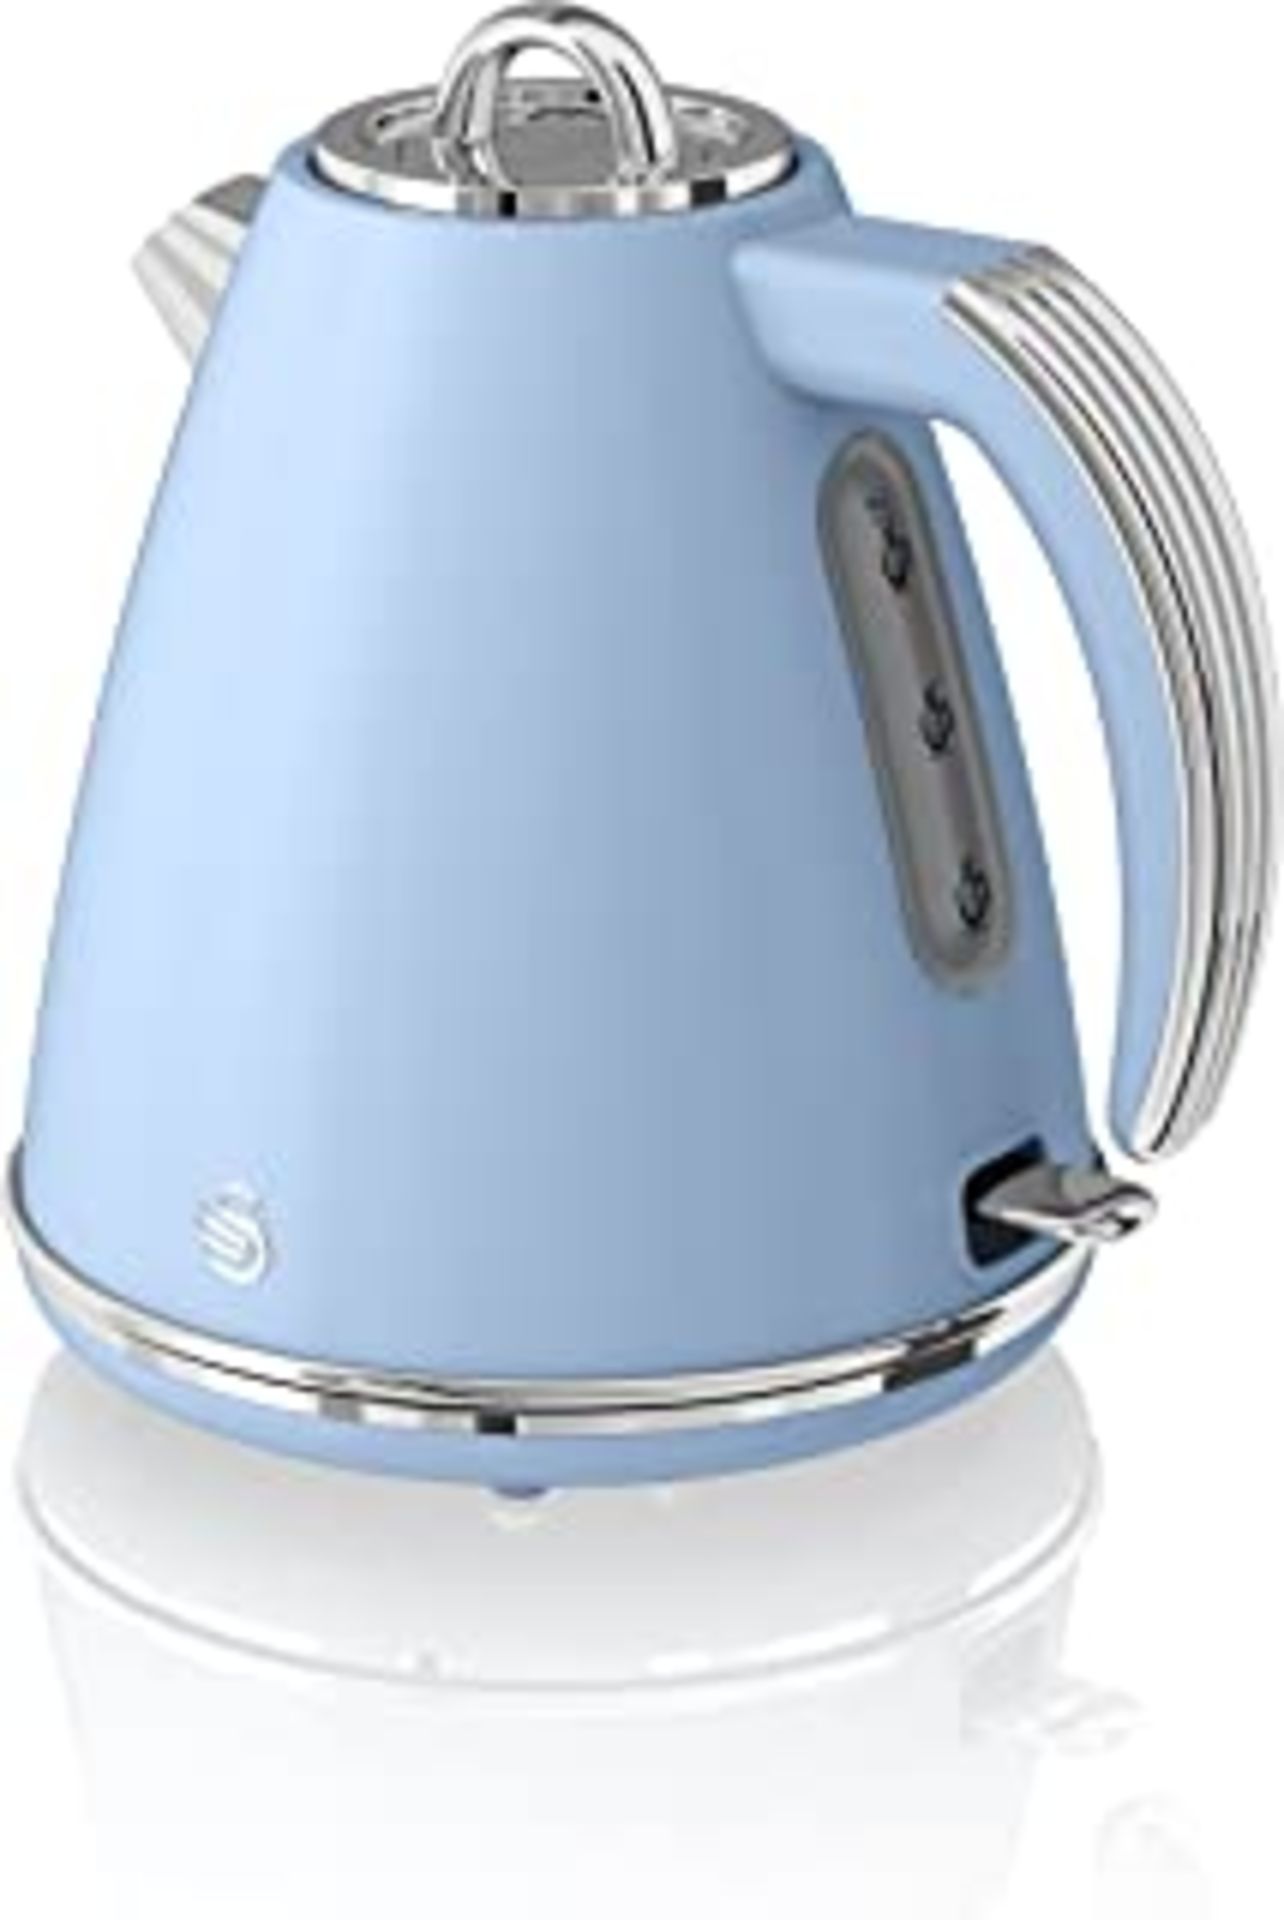 RRP-£38 Swan Retro 1.5 Litre Jug Kettle, Blue, with 360 Degree Rotational Base, 3KW Fast Boil, Easy